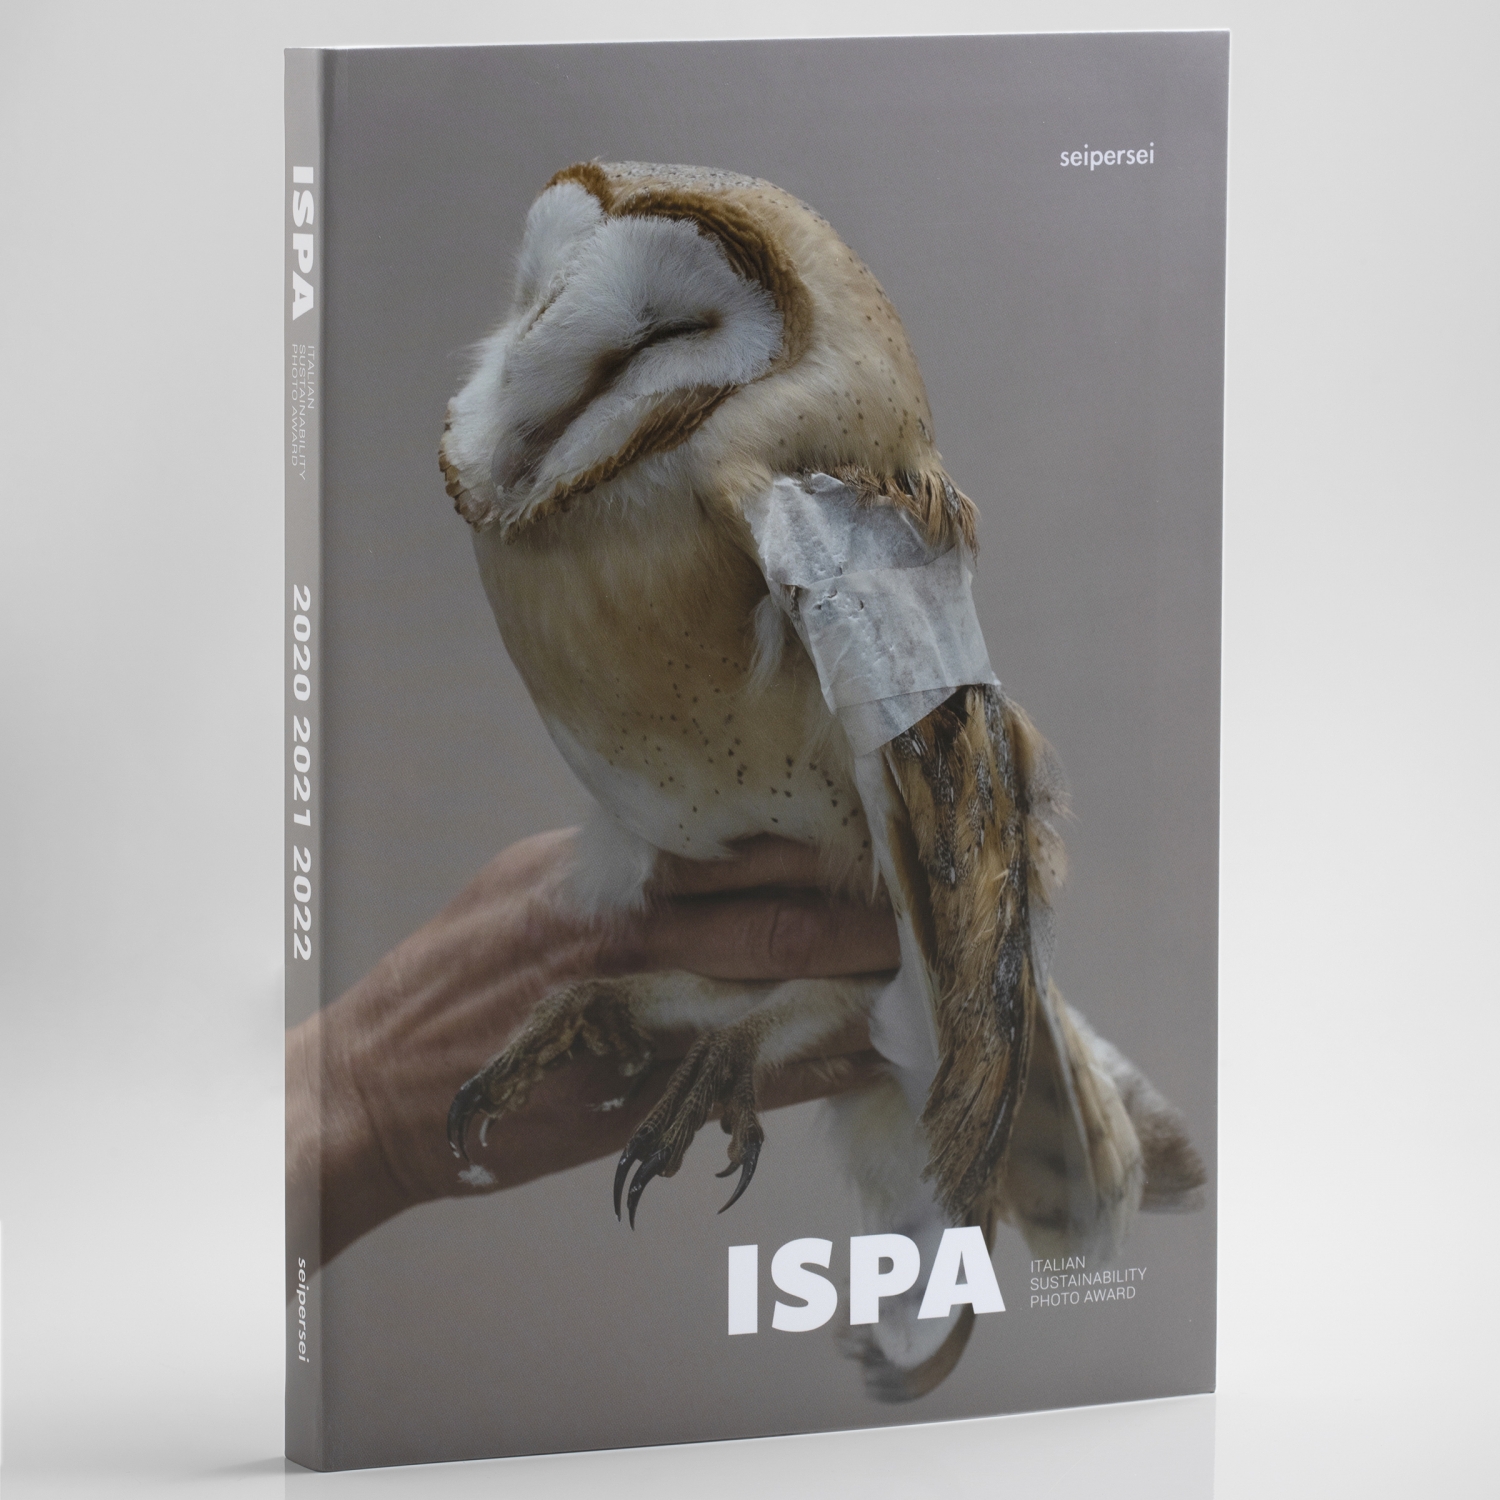 ISPA'S SUSTAINABILITY STORIES ARE NOW A BOOK!